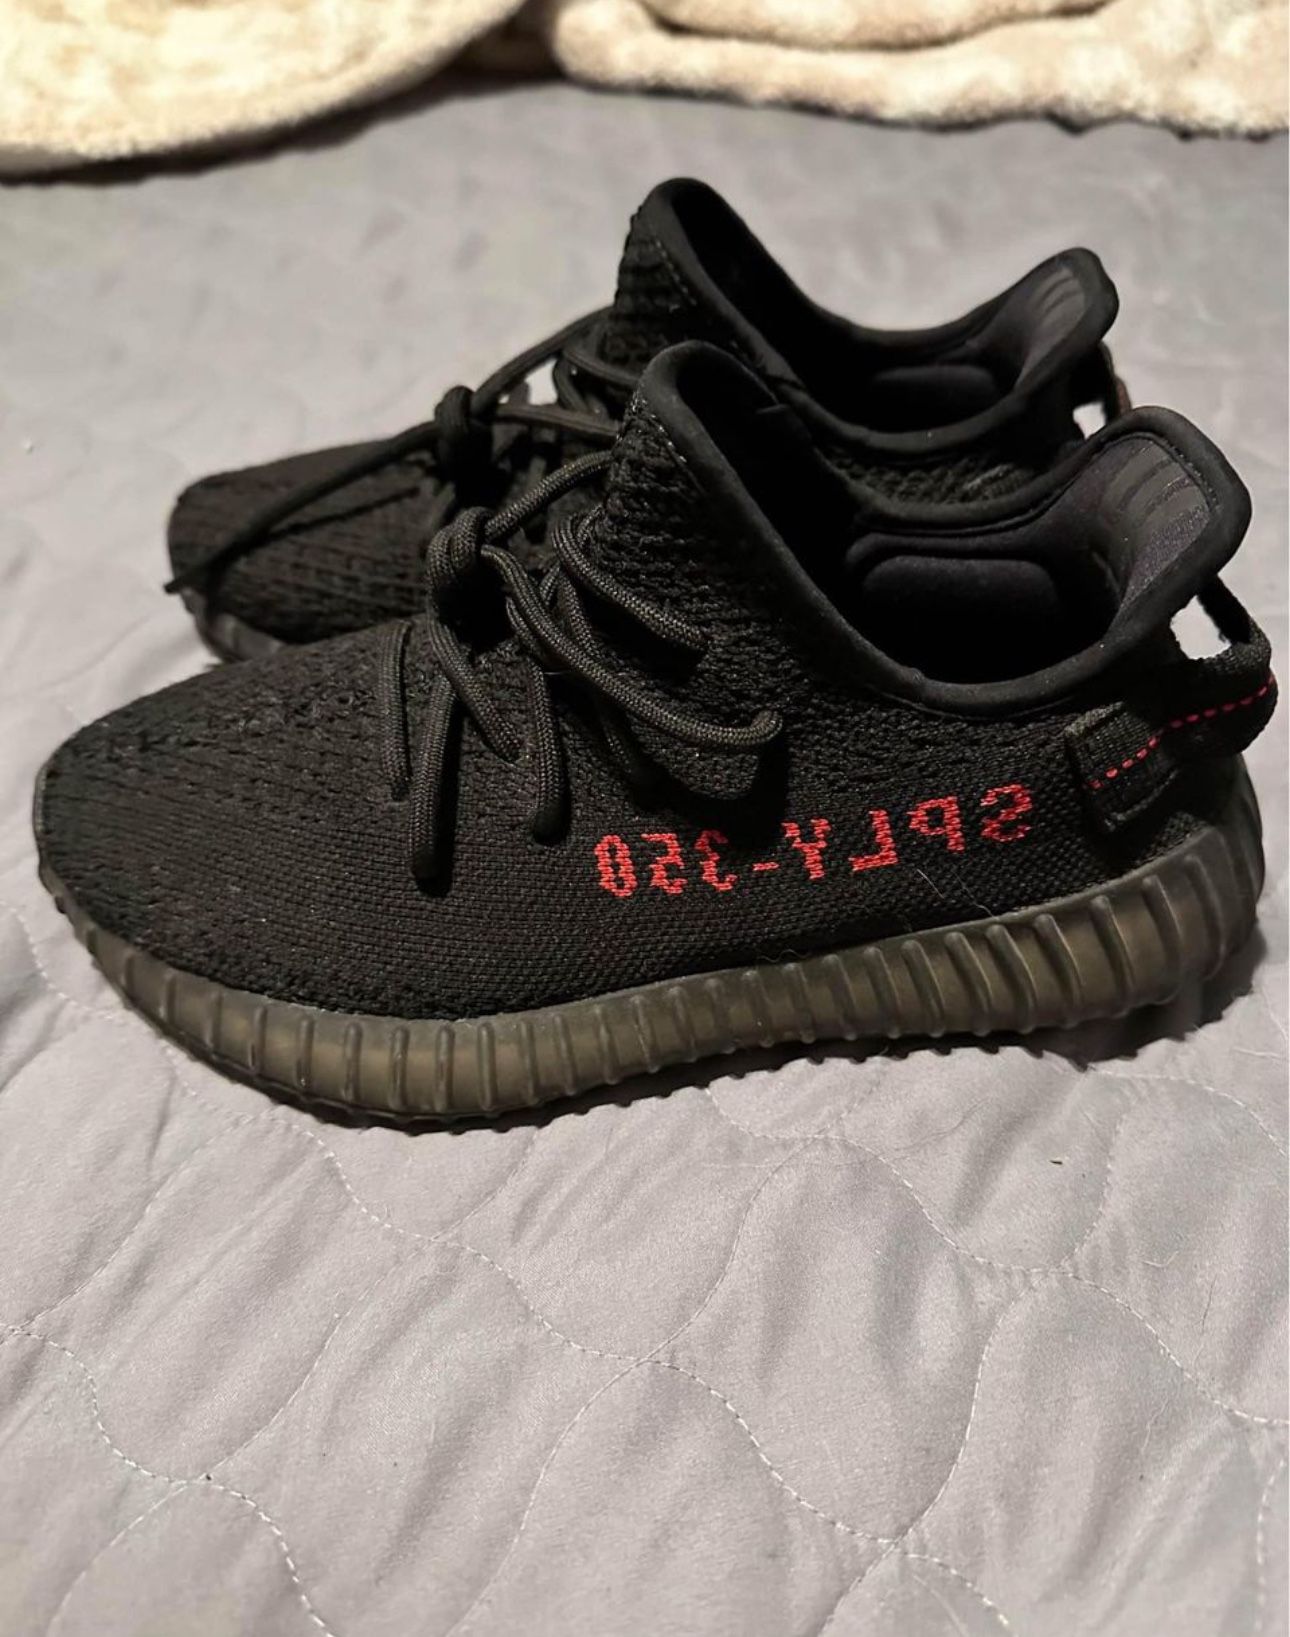 Yeezy 350 Bred Size 6 